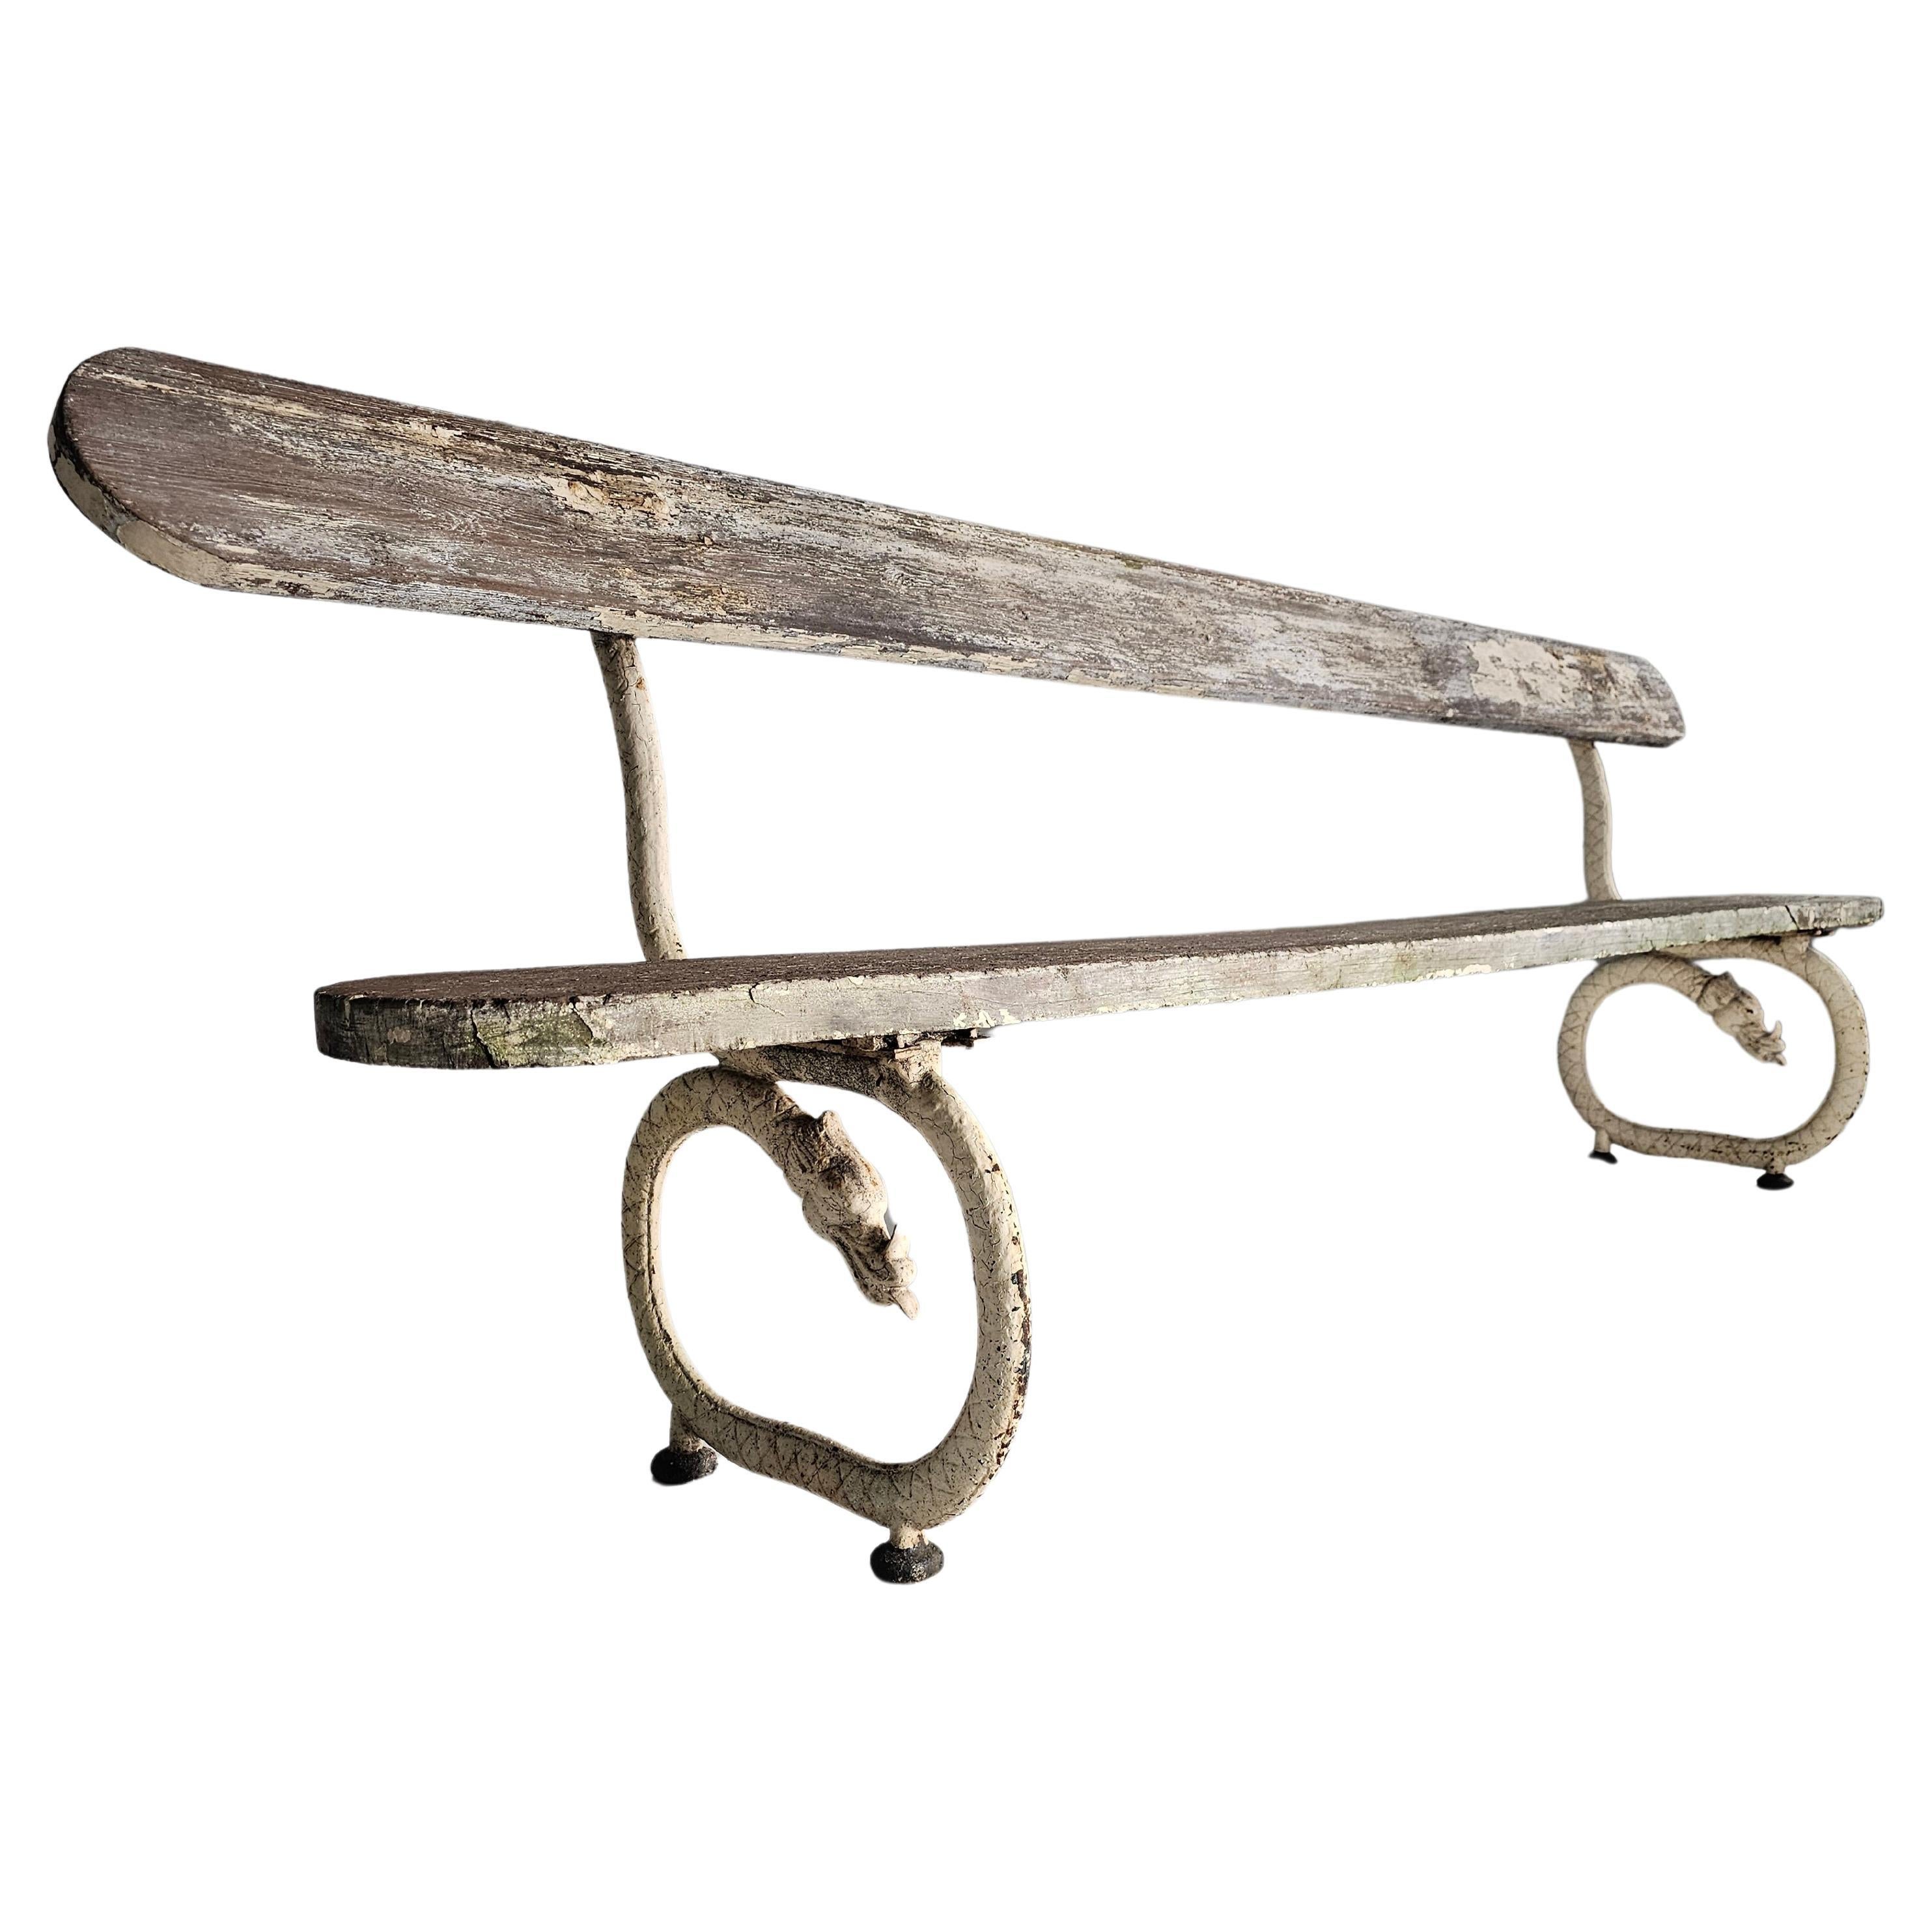 Early 1900 French Garden Bench with Dragons and Arrows